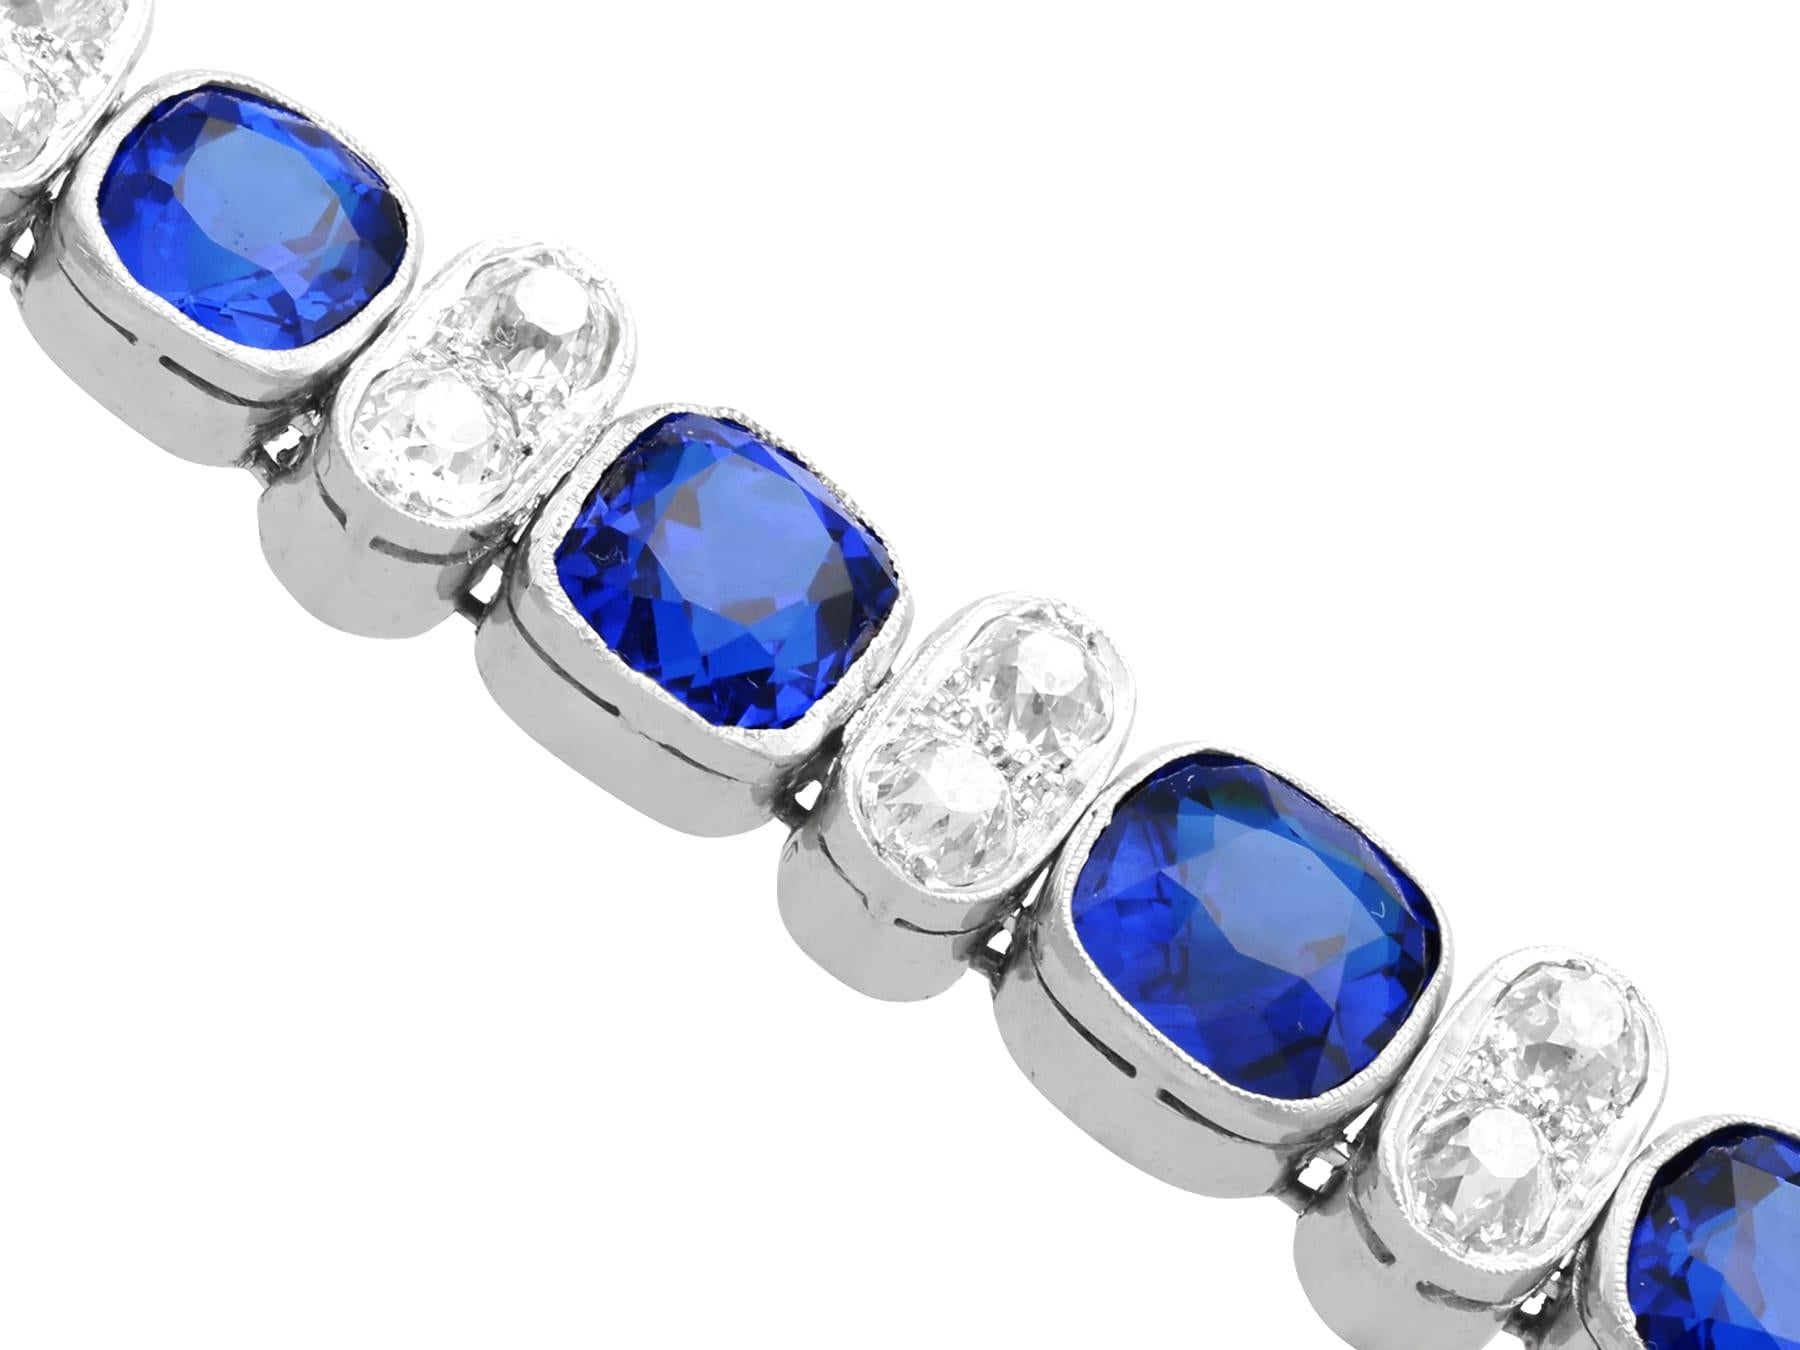 1900s Synthetic Blue Spinel and 2.04 Carat Diamond White Gold Bracelet In Excellent Condition For Sale In Jesmond, Newcastle Upon Tyne